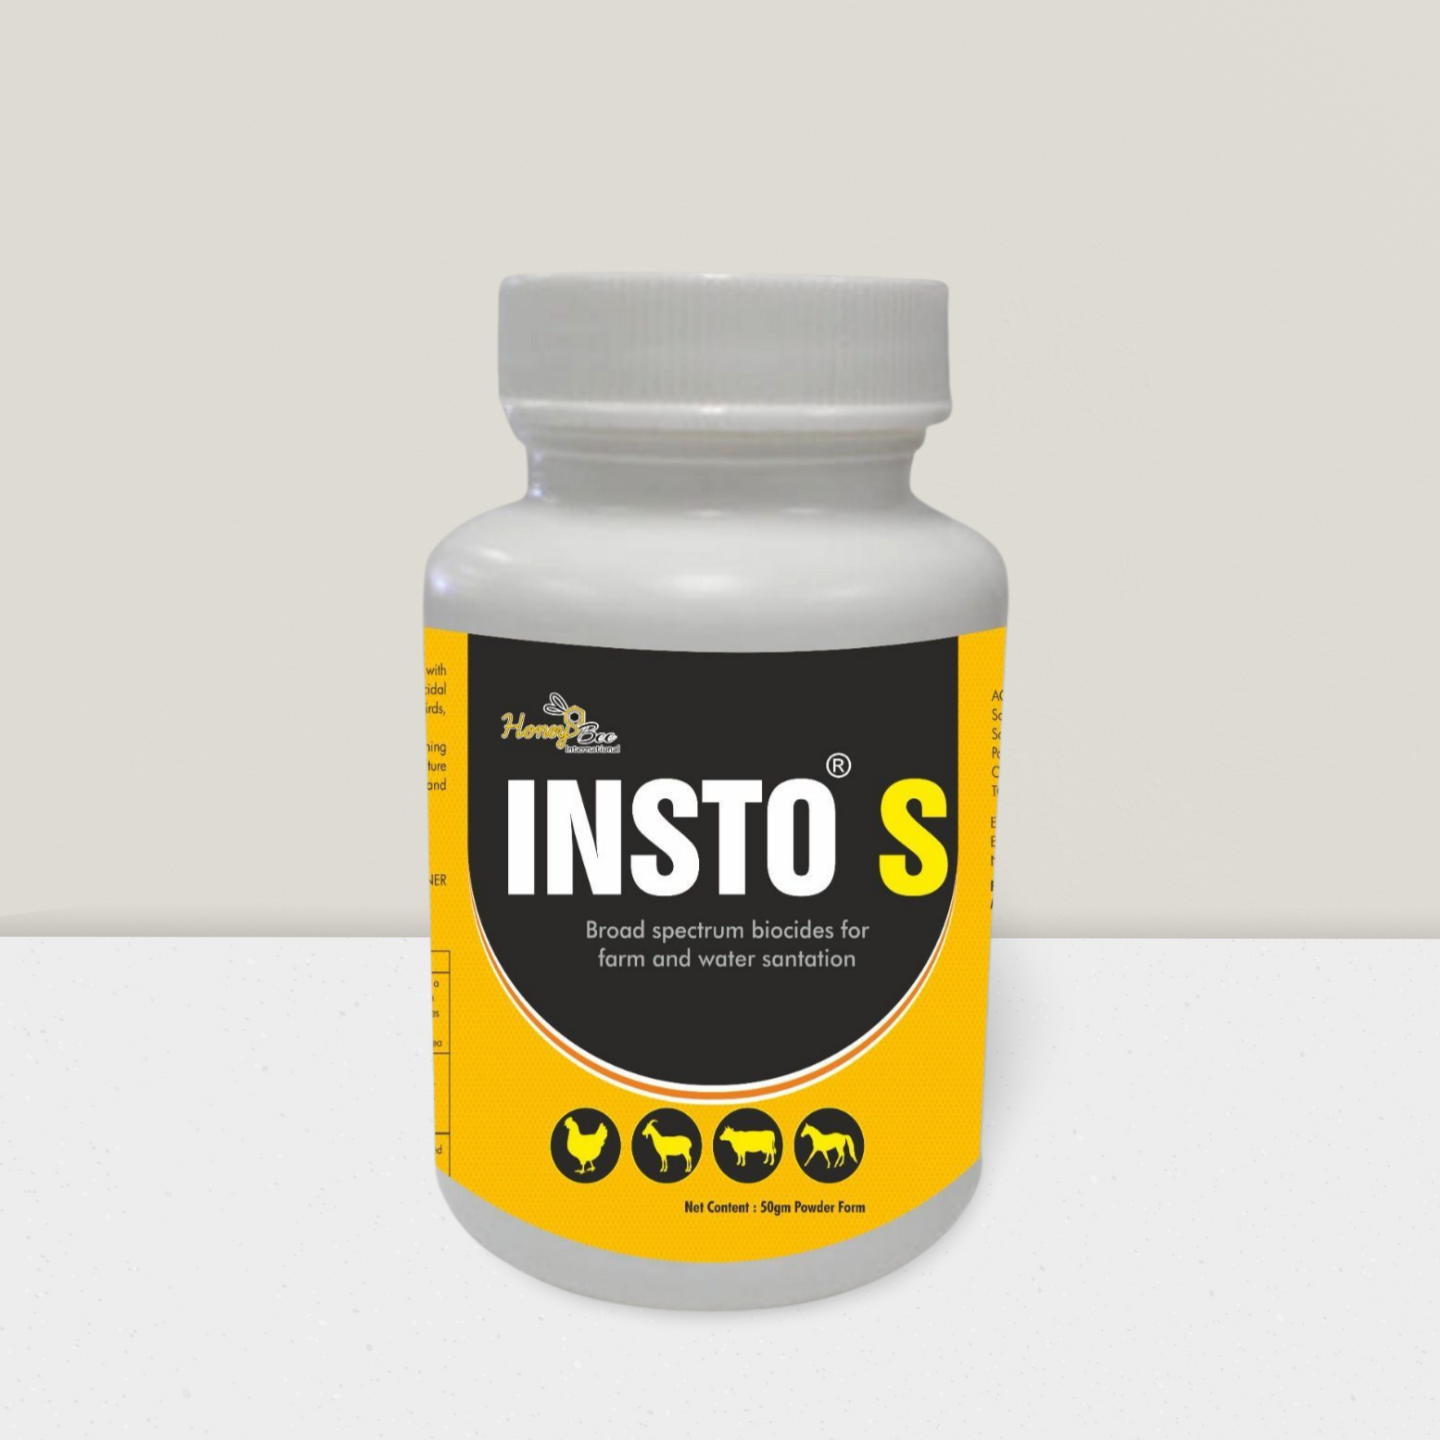 INSTO S (A Bio Security Product)